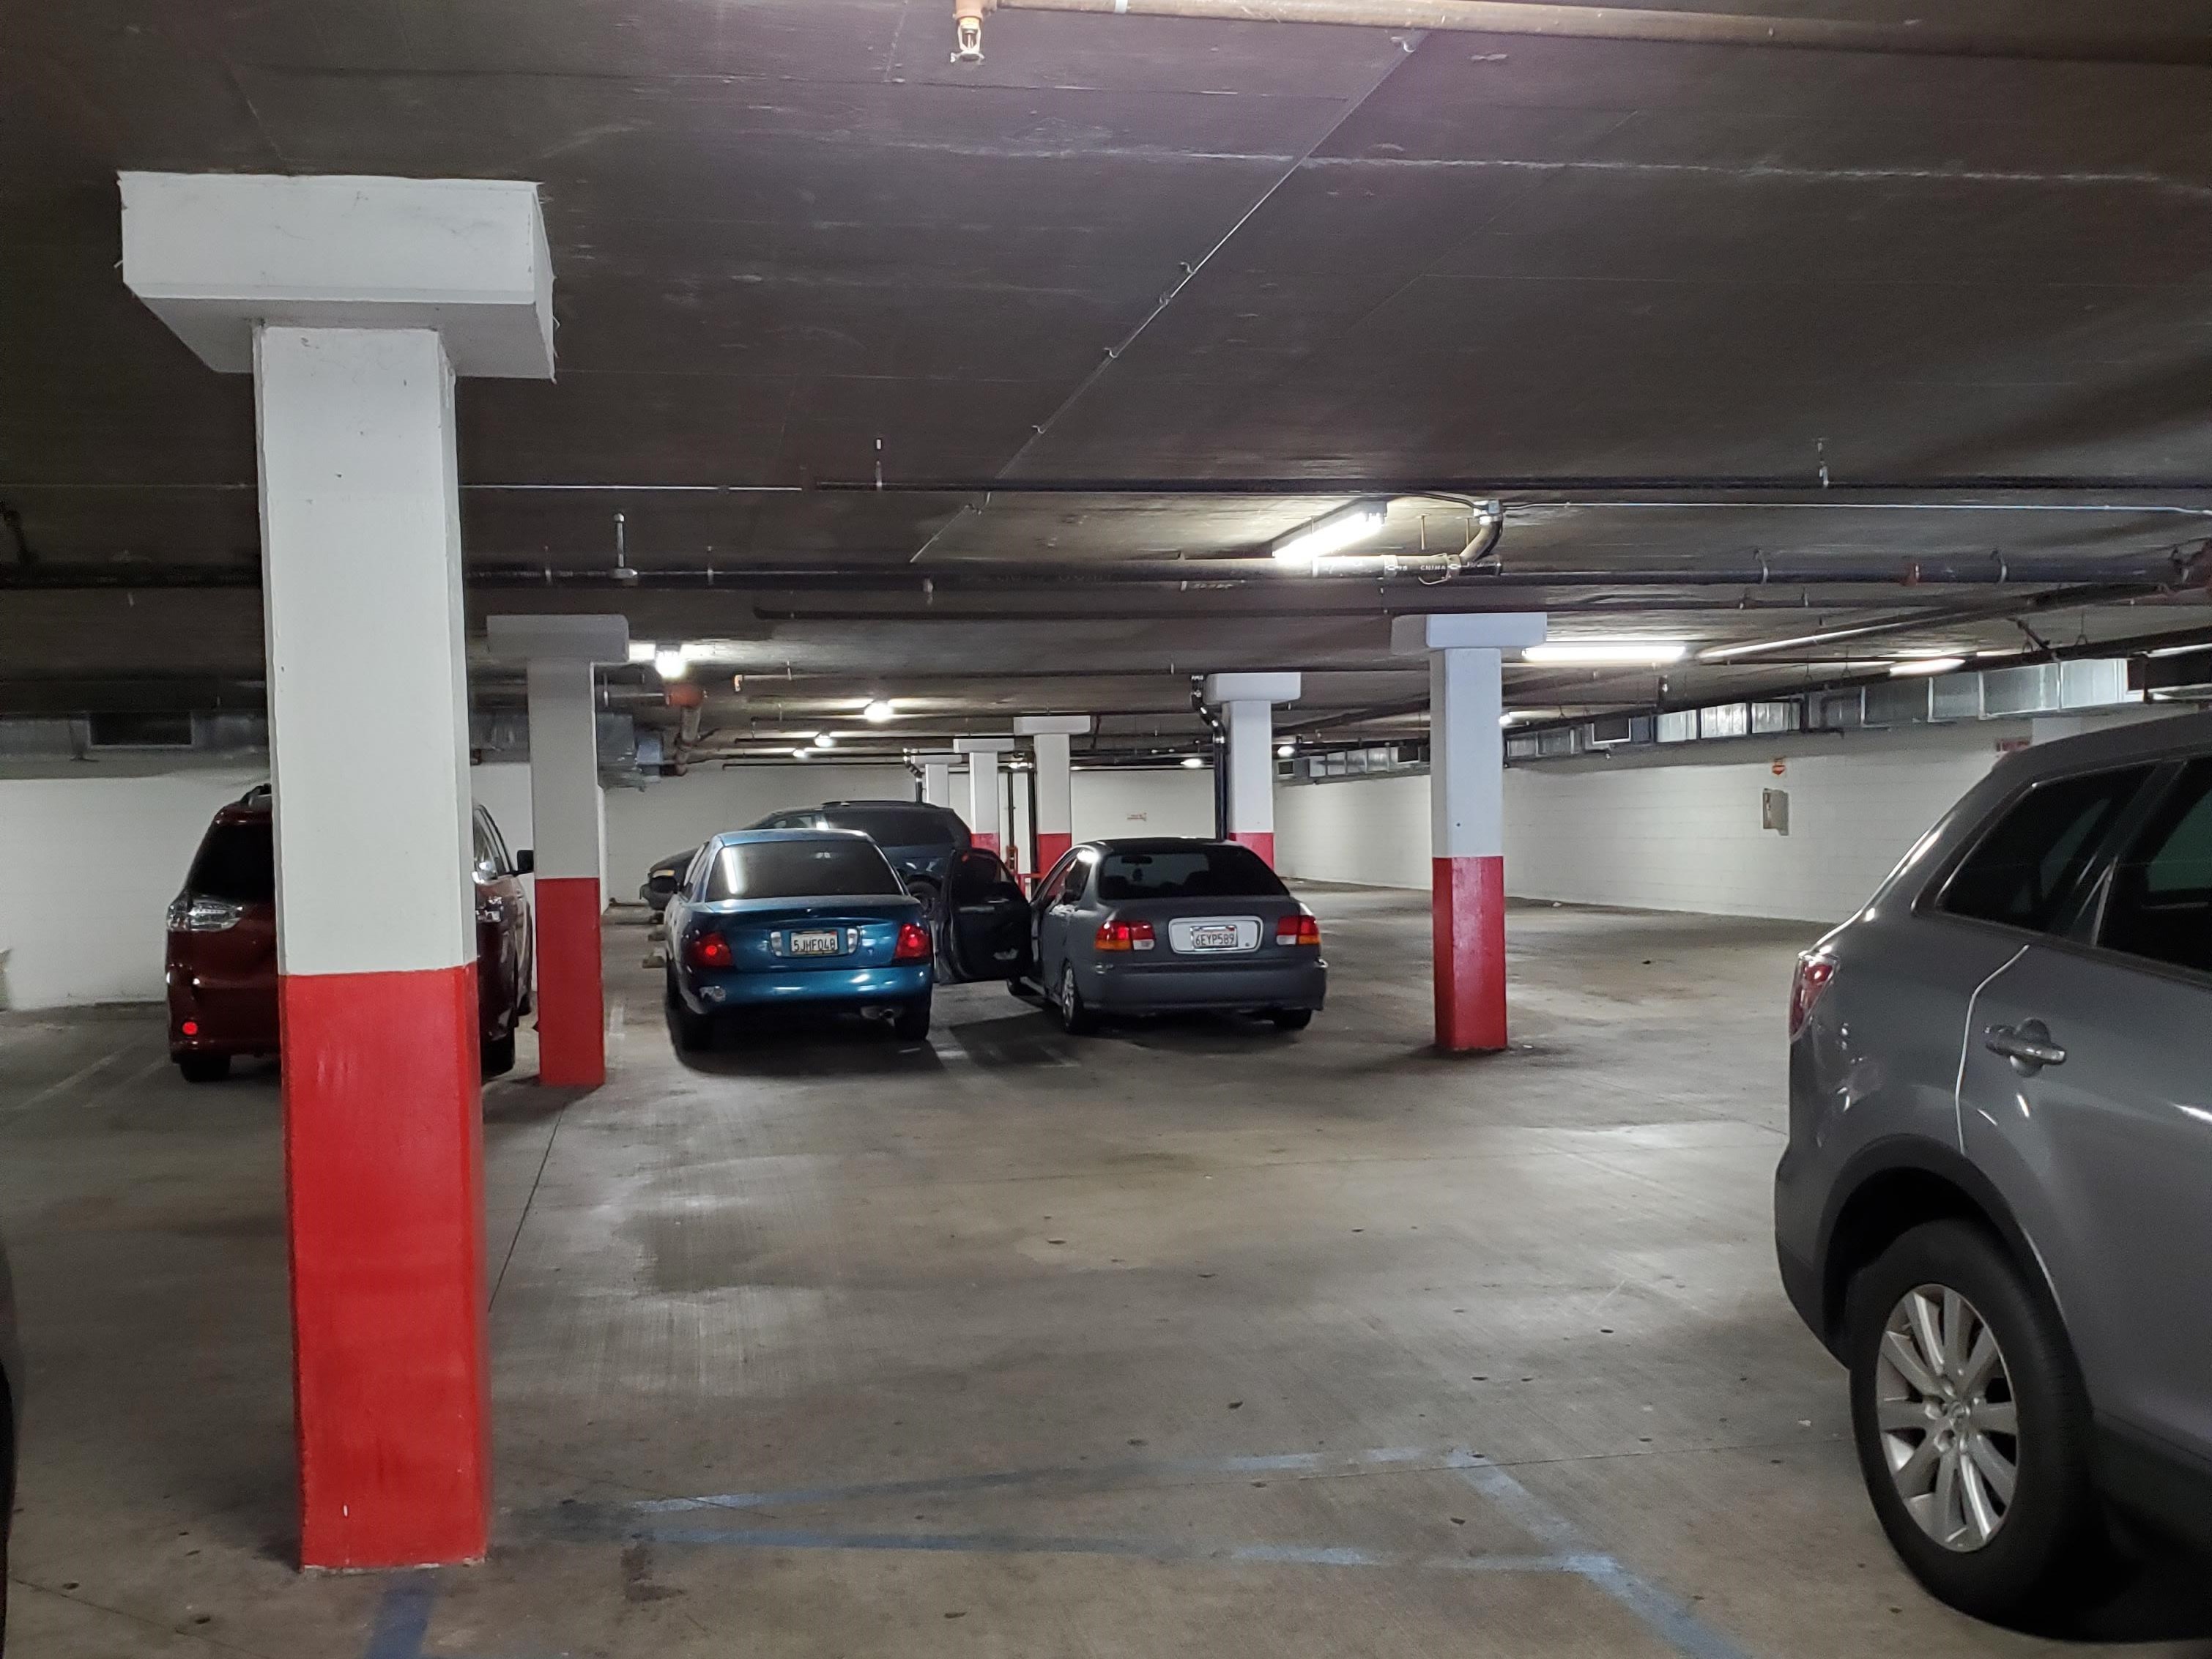 Underground garage with cement floor, four parked cars, one more car with driver side door open, wide tall pillars white top and red bottom color.